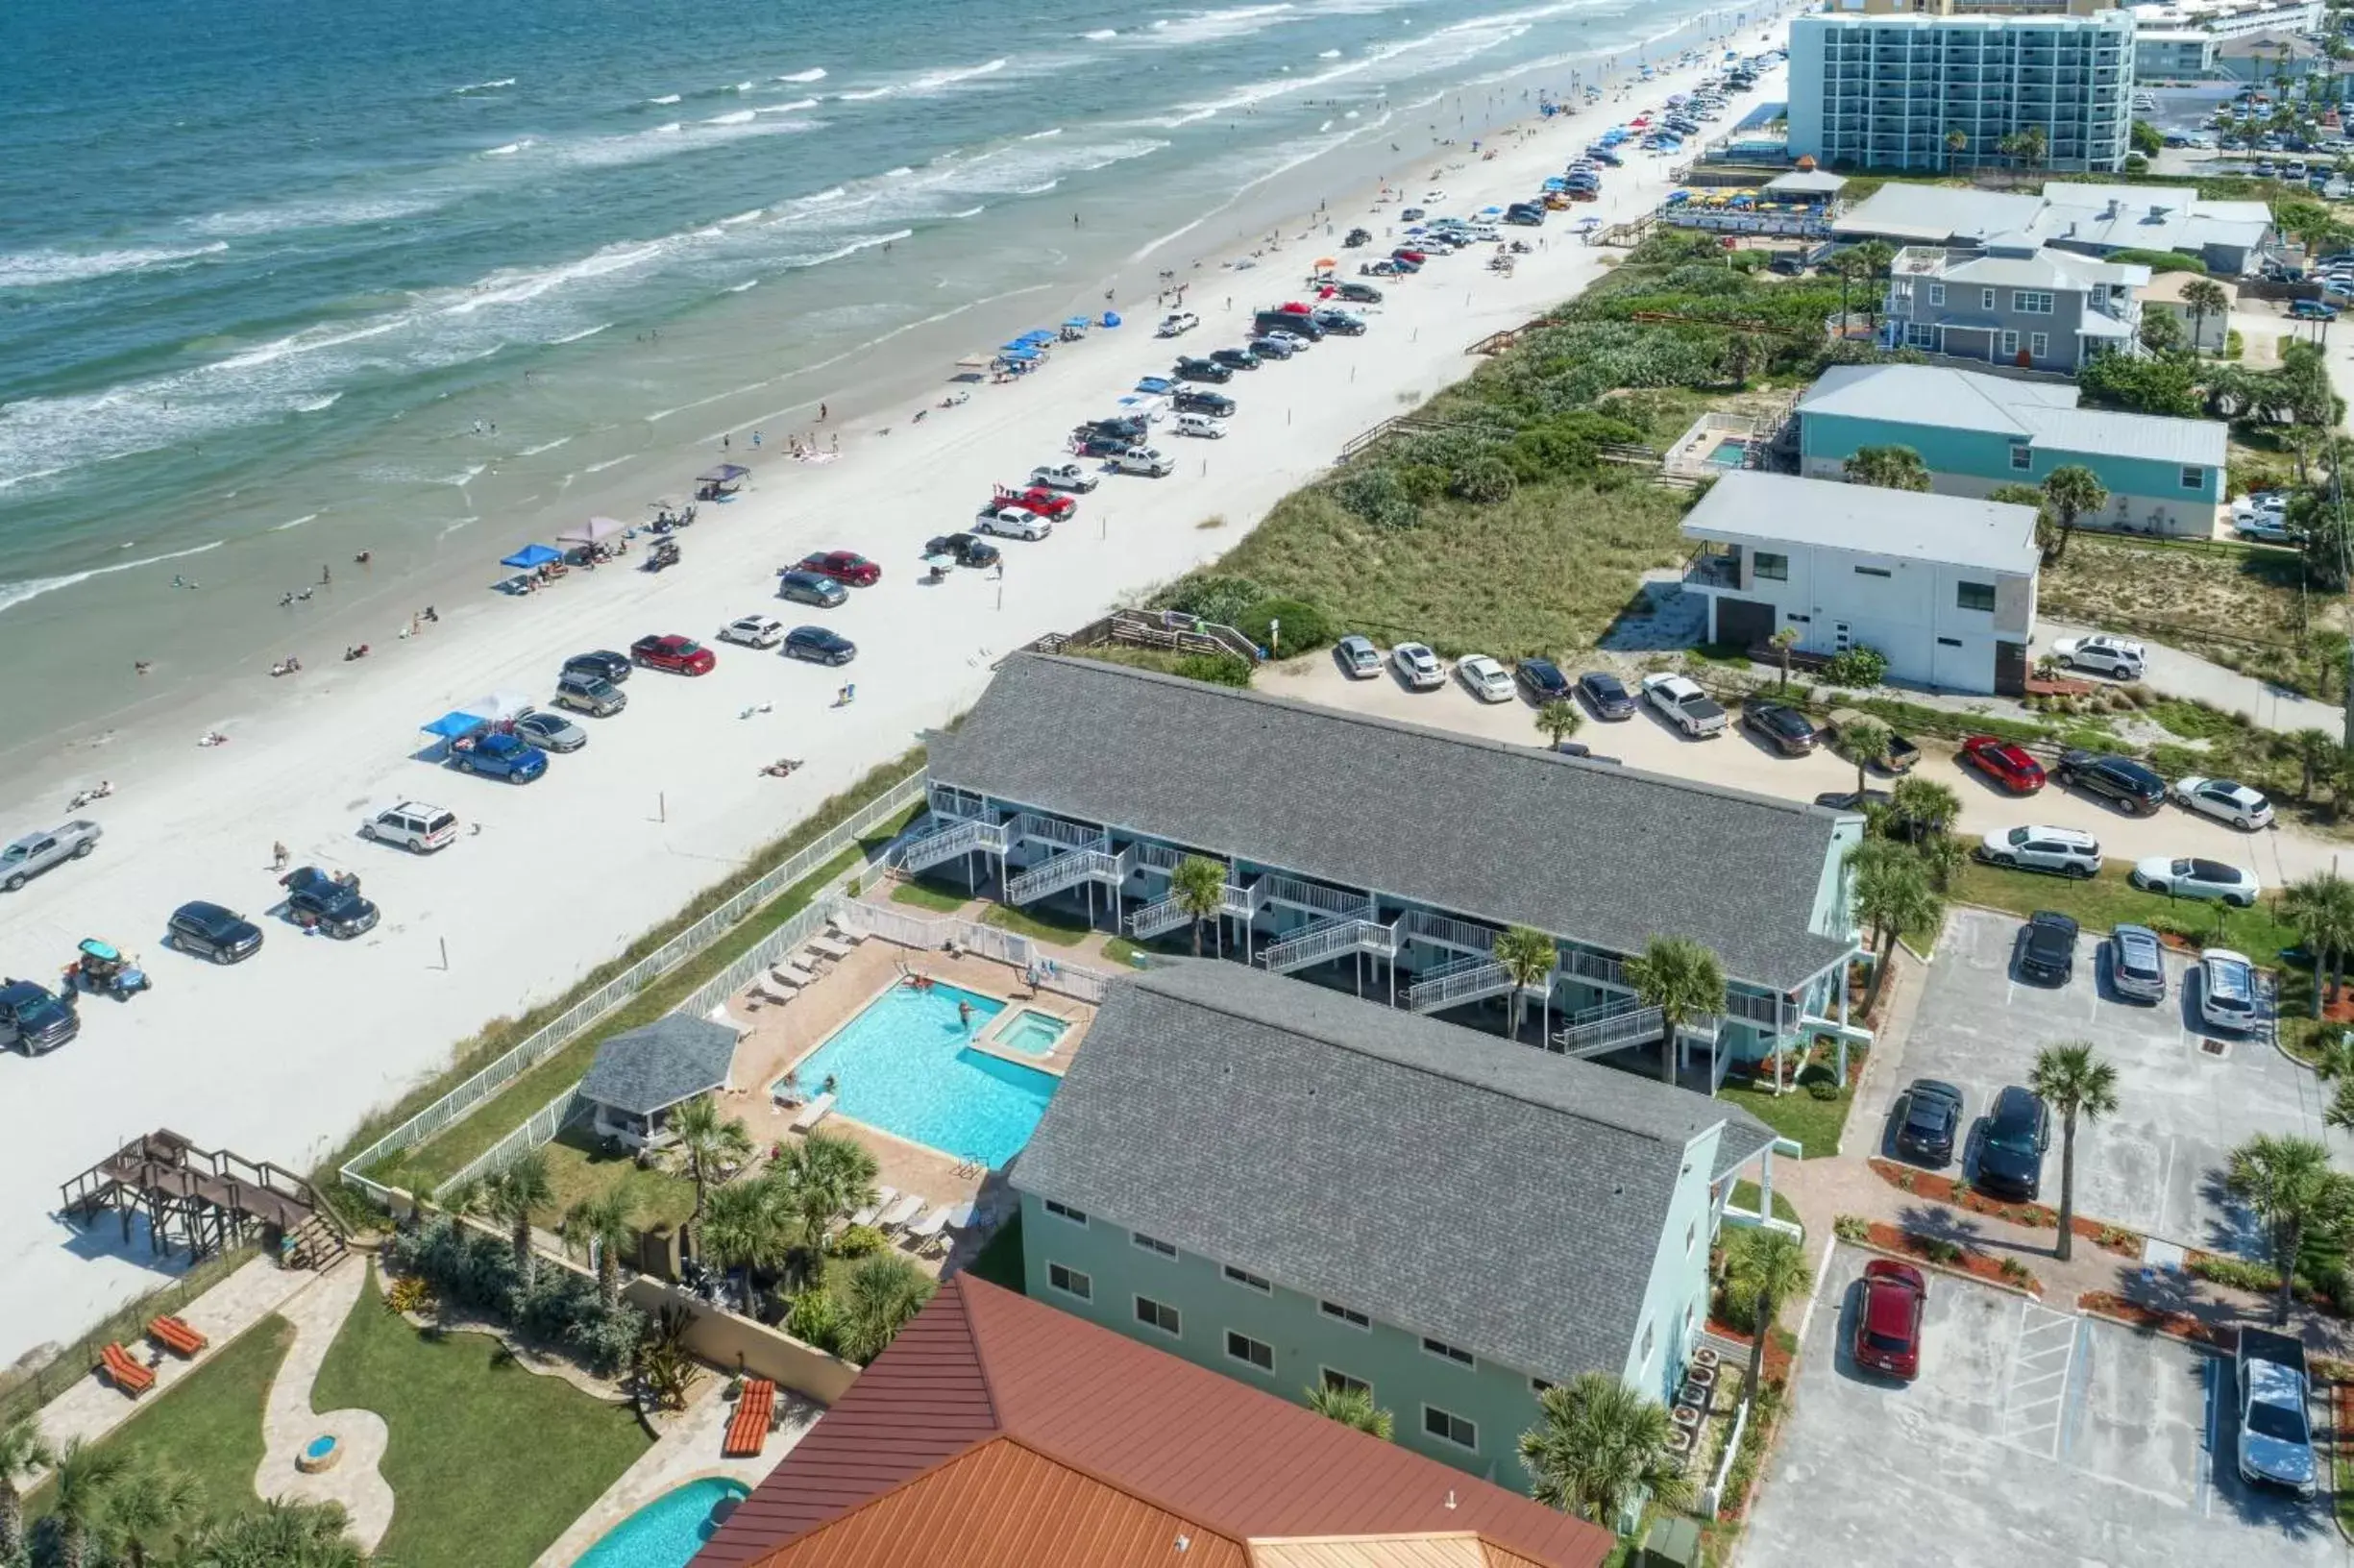 Property building, Bird's-eye View in New Smyrna Waves by Exploria Resorts